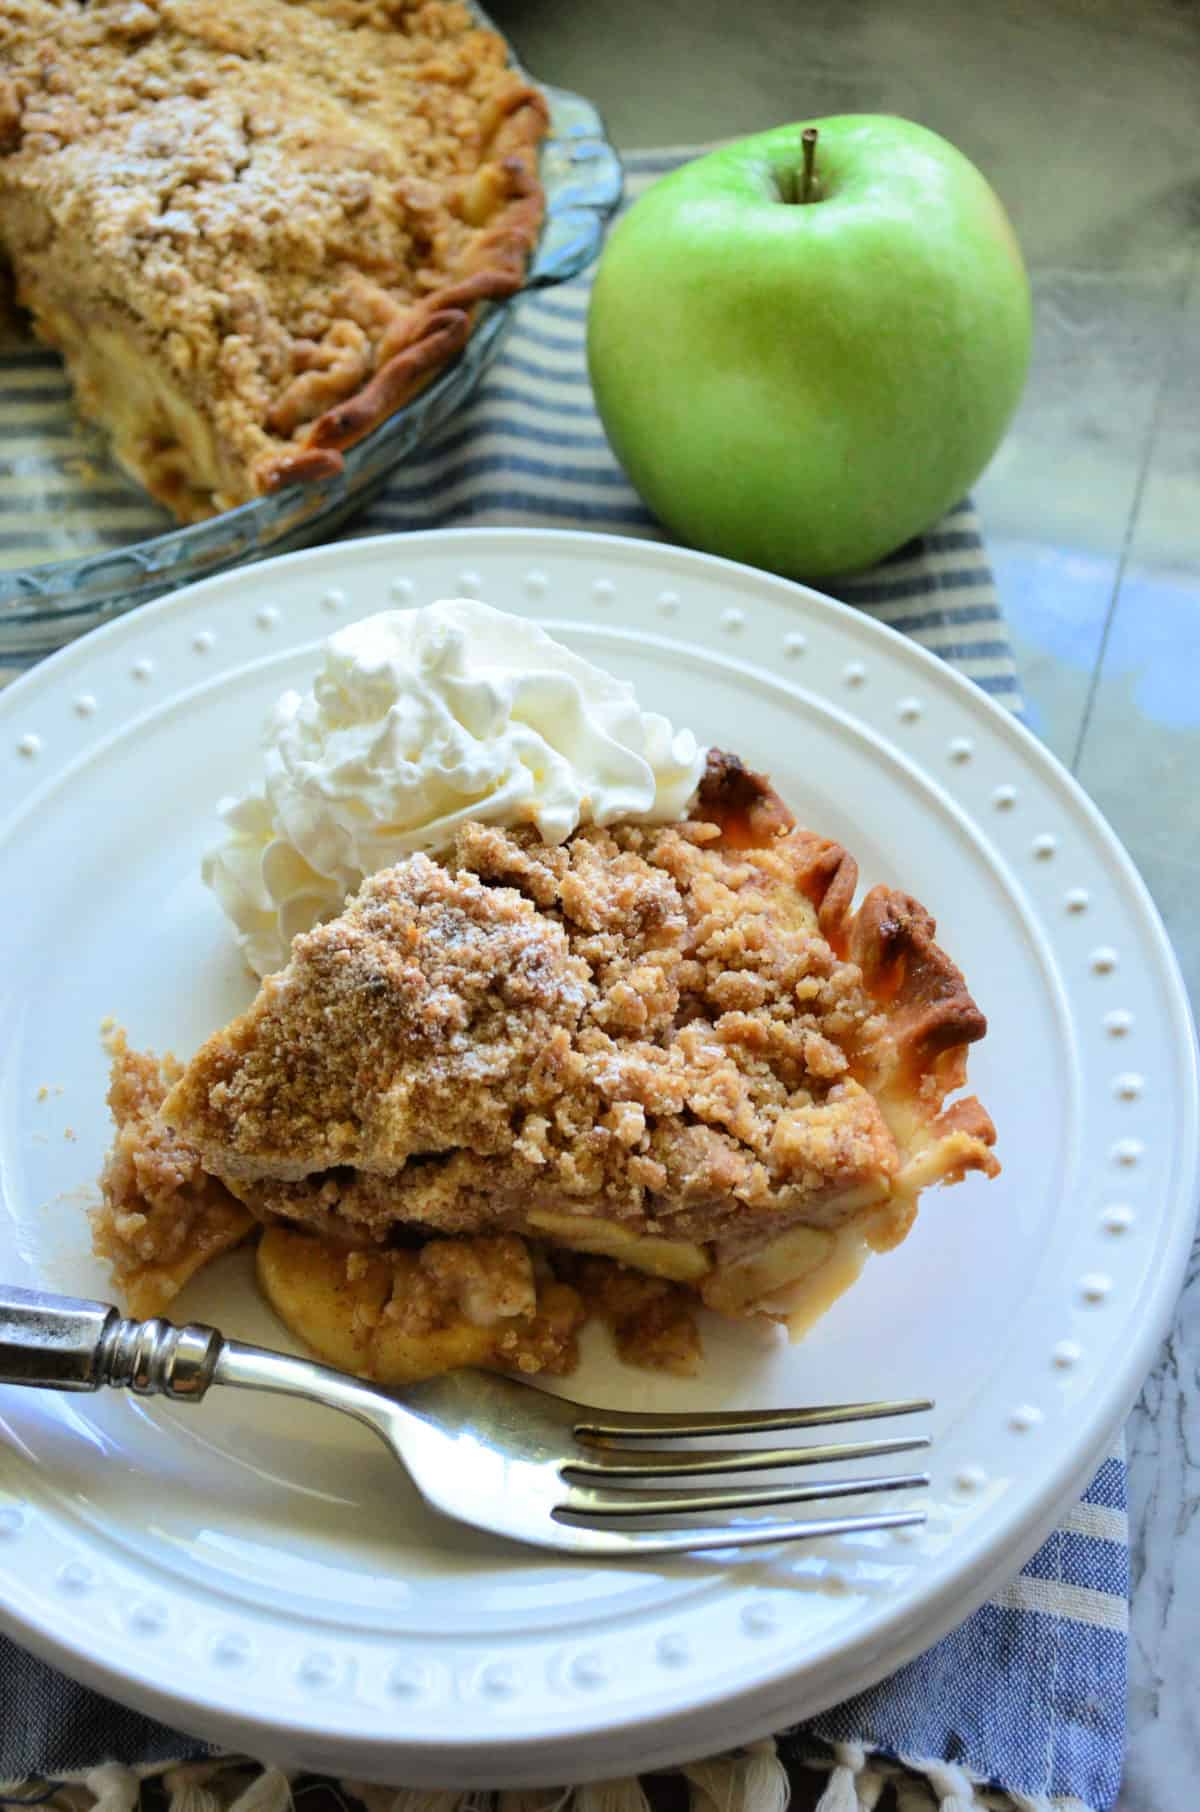 Plated slice of apple pie with fork and whipped cream next to fresh green apple.